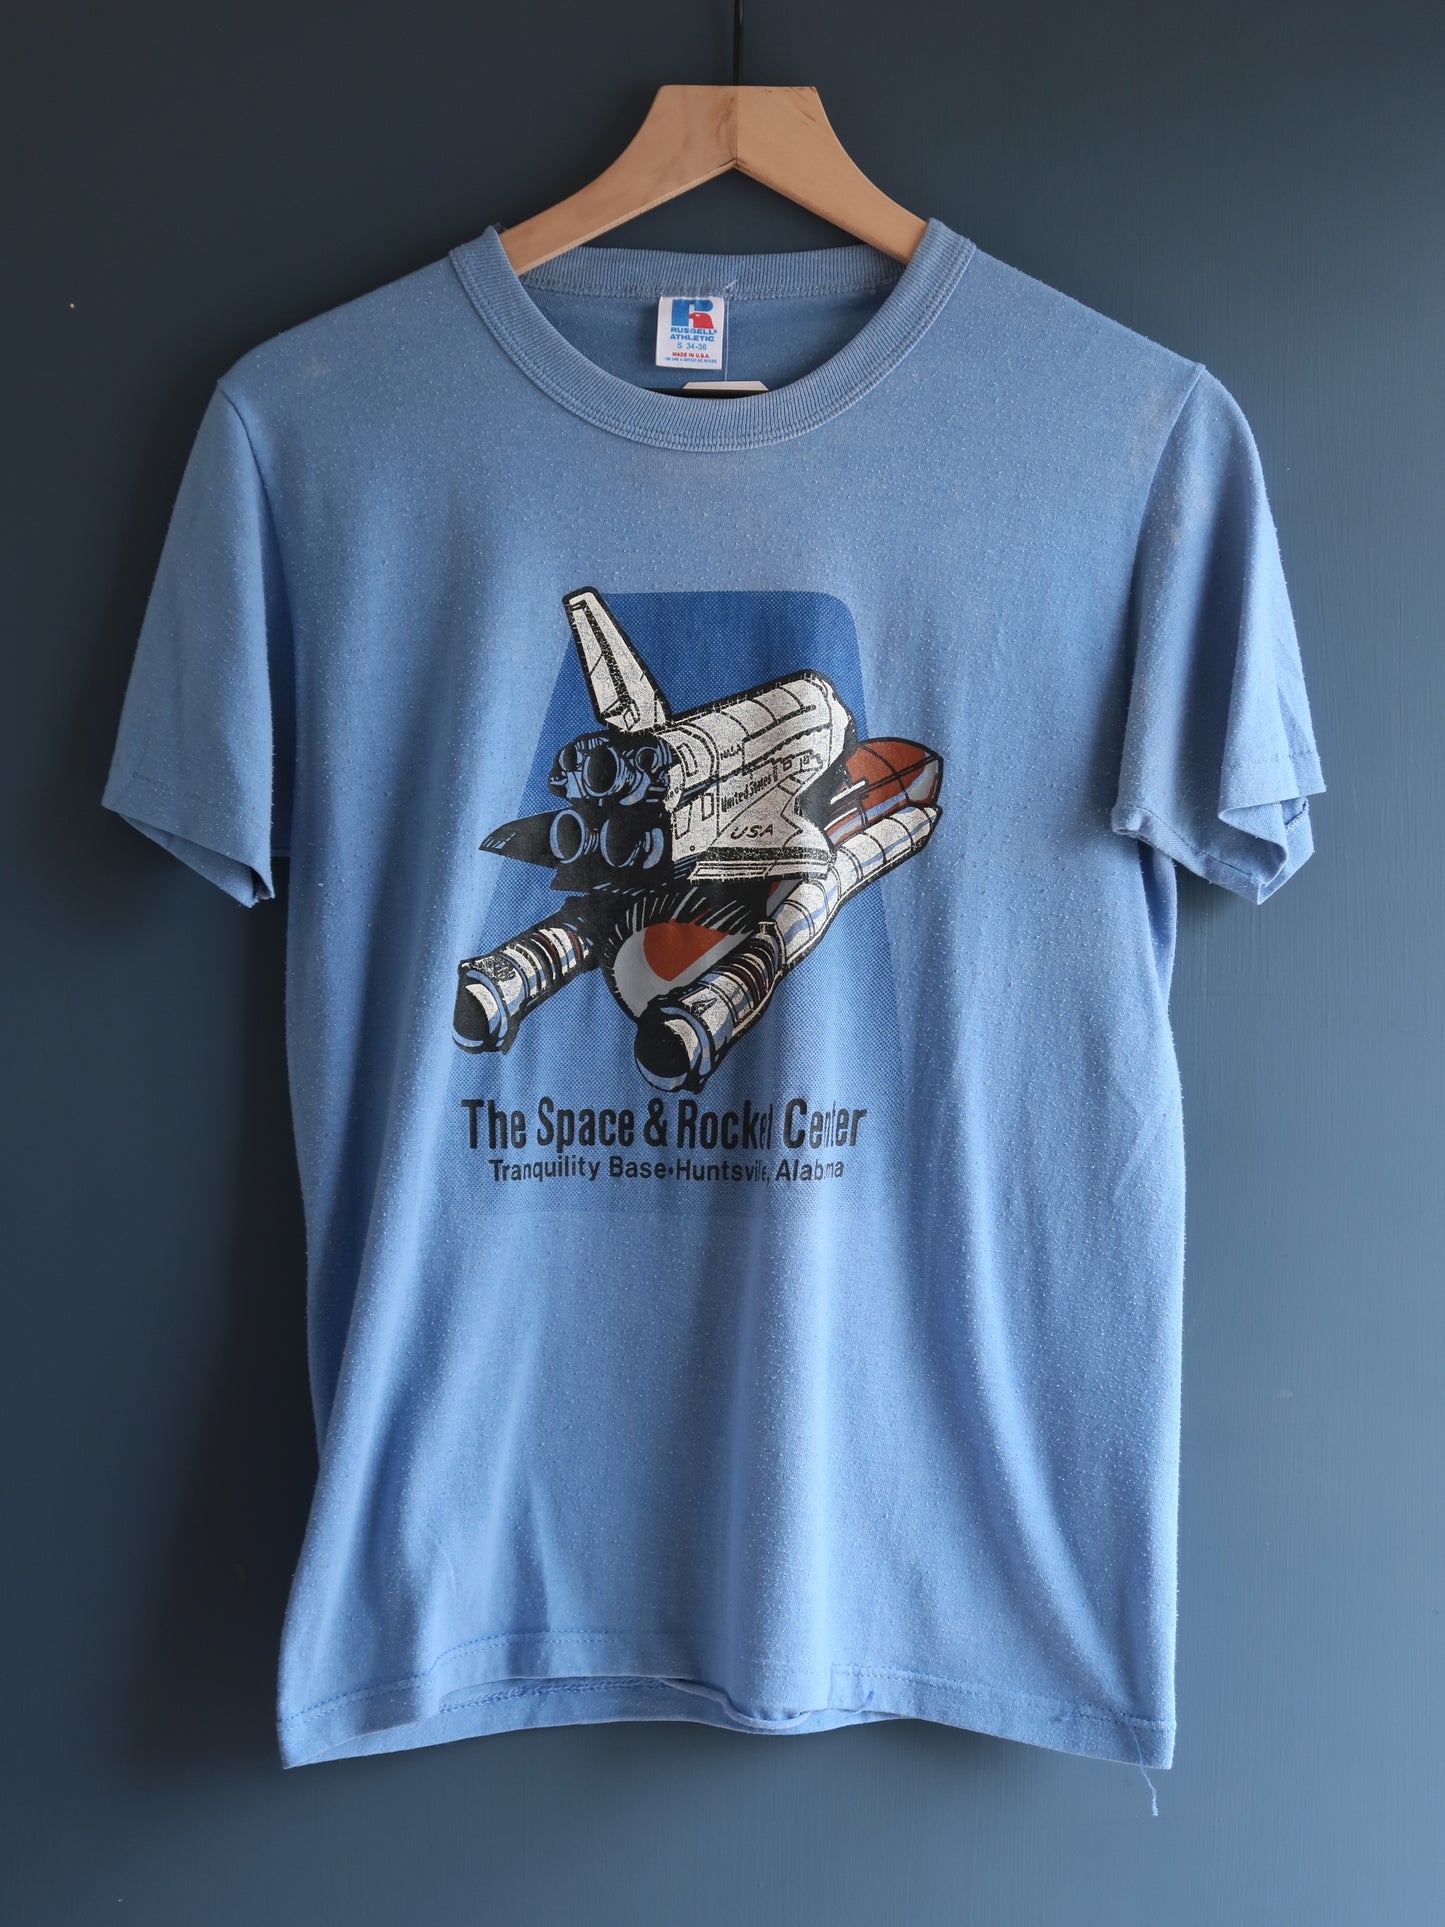 1980's Space And Rocket Center Tee Size S